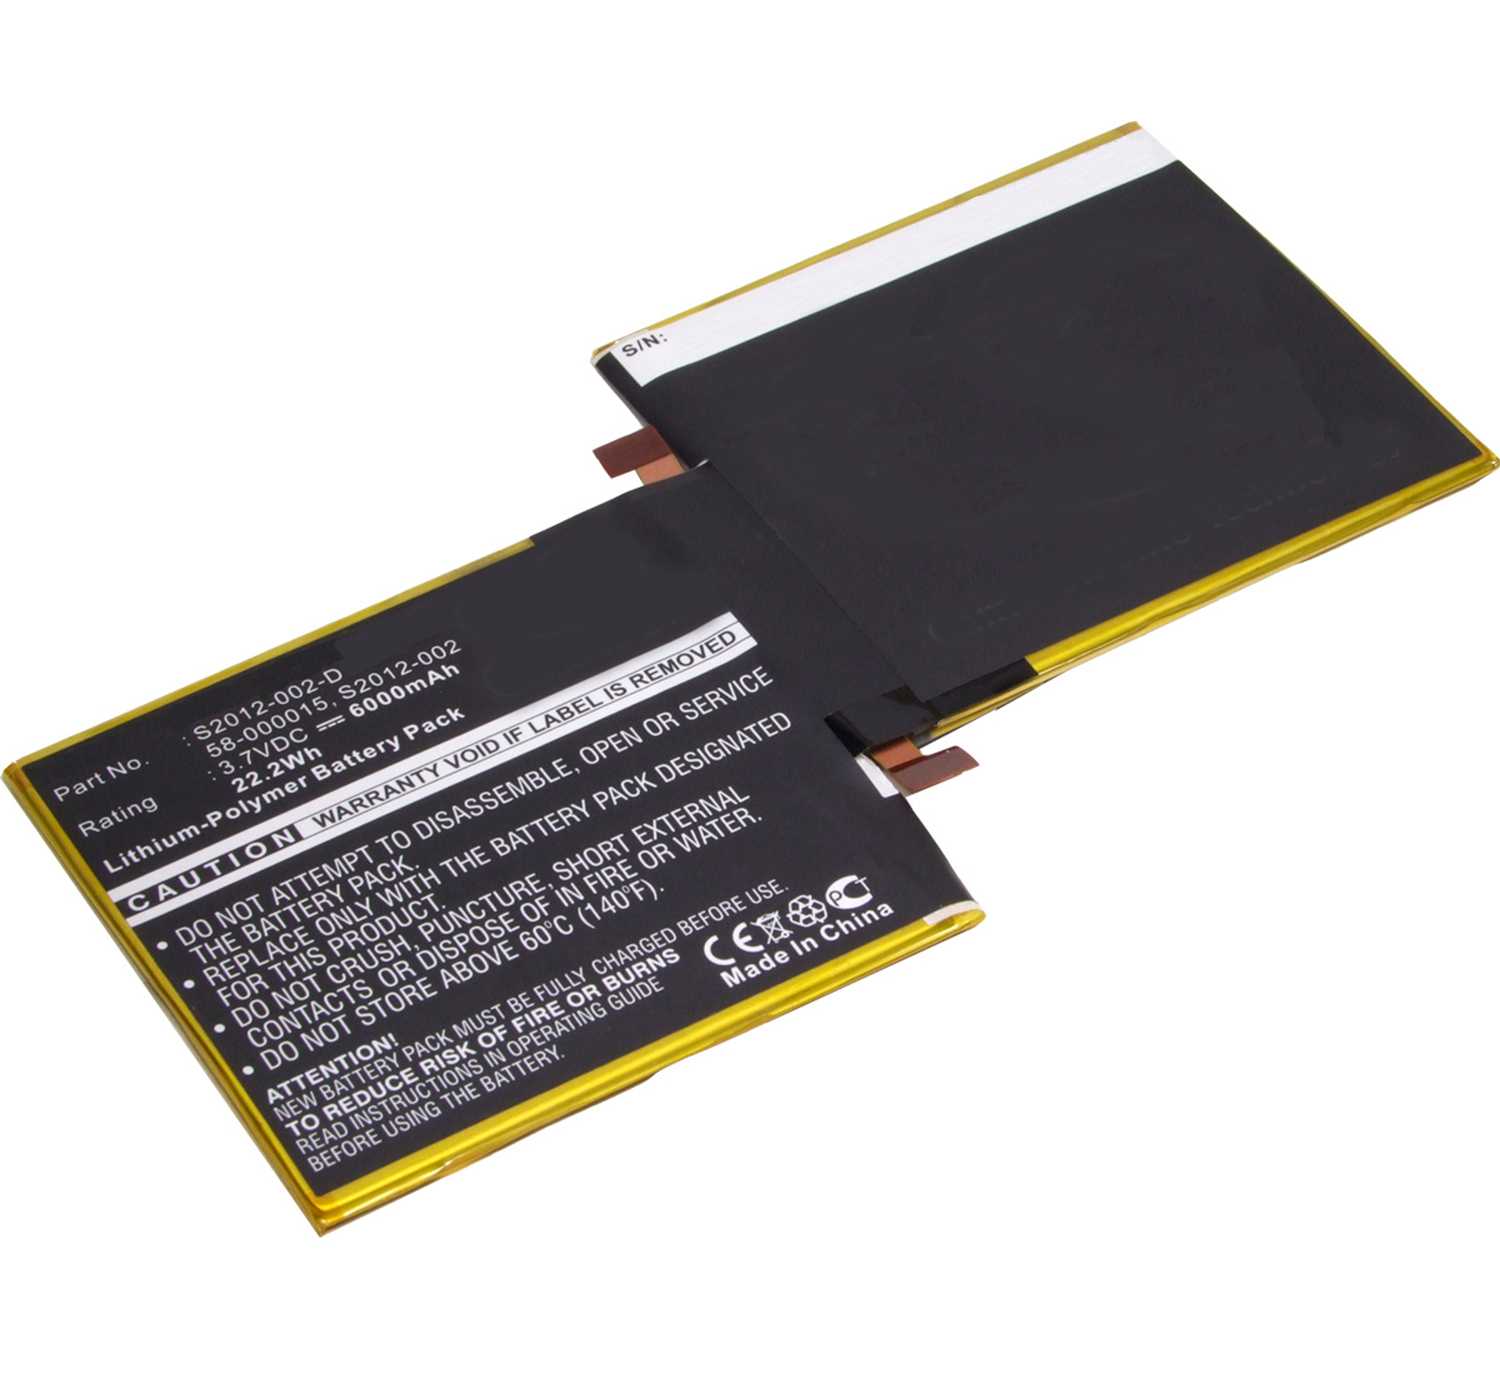 amazon kindle fire replacement battery